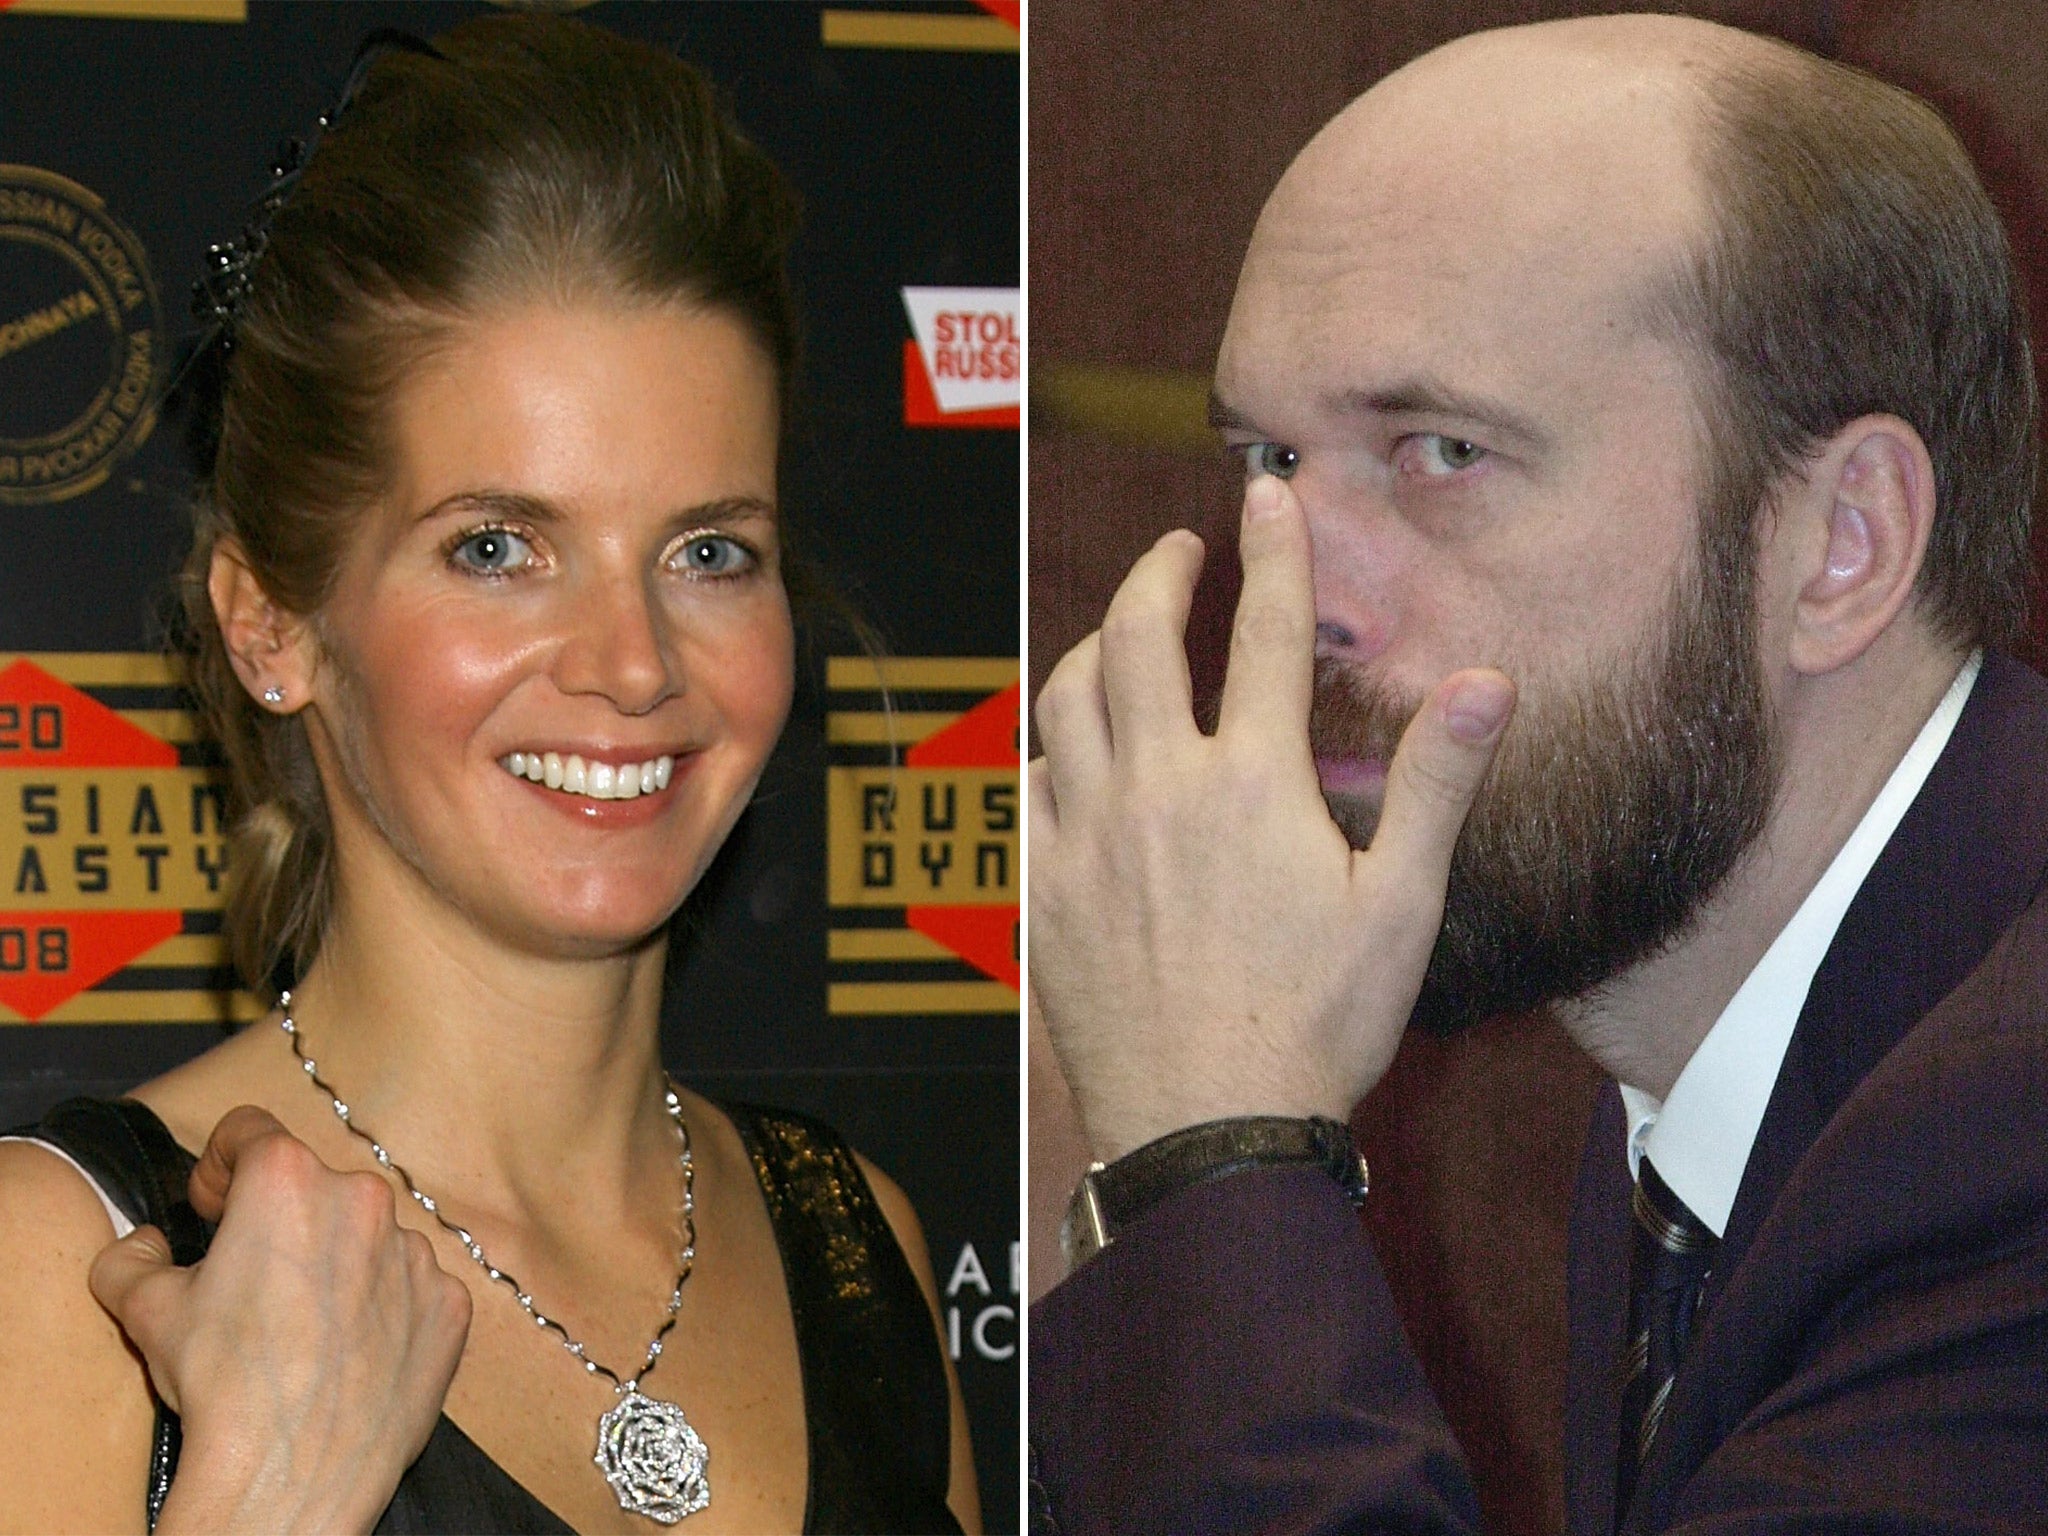 Alexandra Tolstoy is now living with Sergei Pugachev, once known as Putin's banker, in London